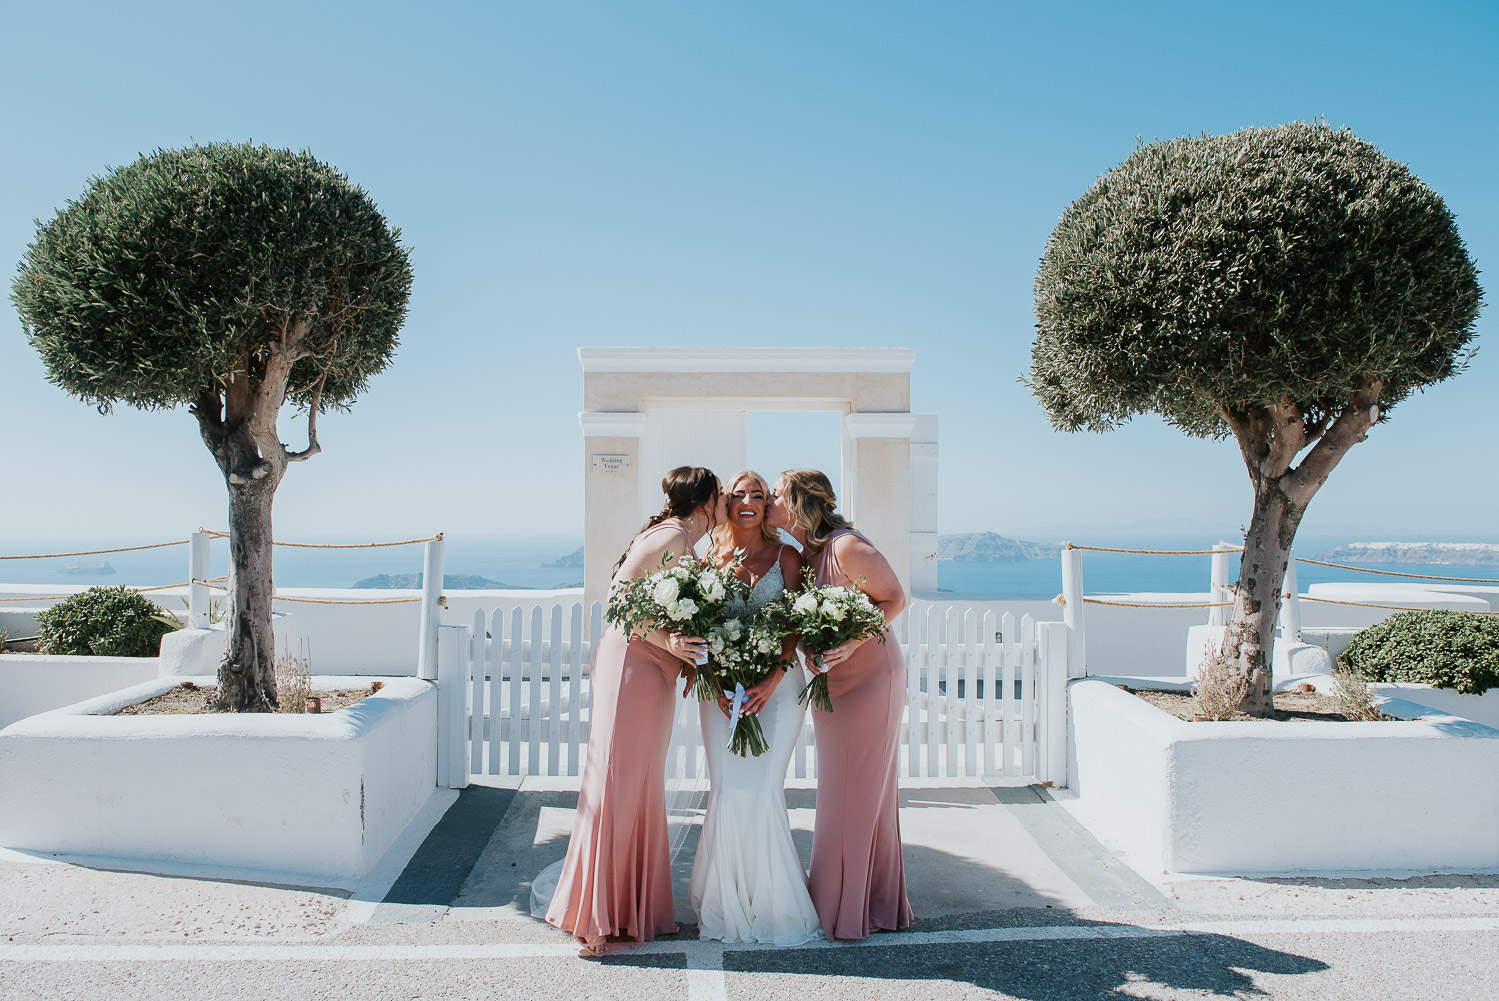 Wedding photographer Santorini: bride gets a kiss on her cheeks by her bridesmaids in front of the gate with trees around by Ben and Vesna.